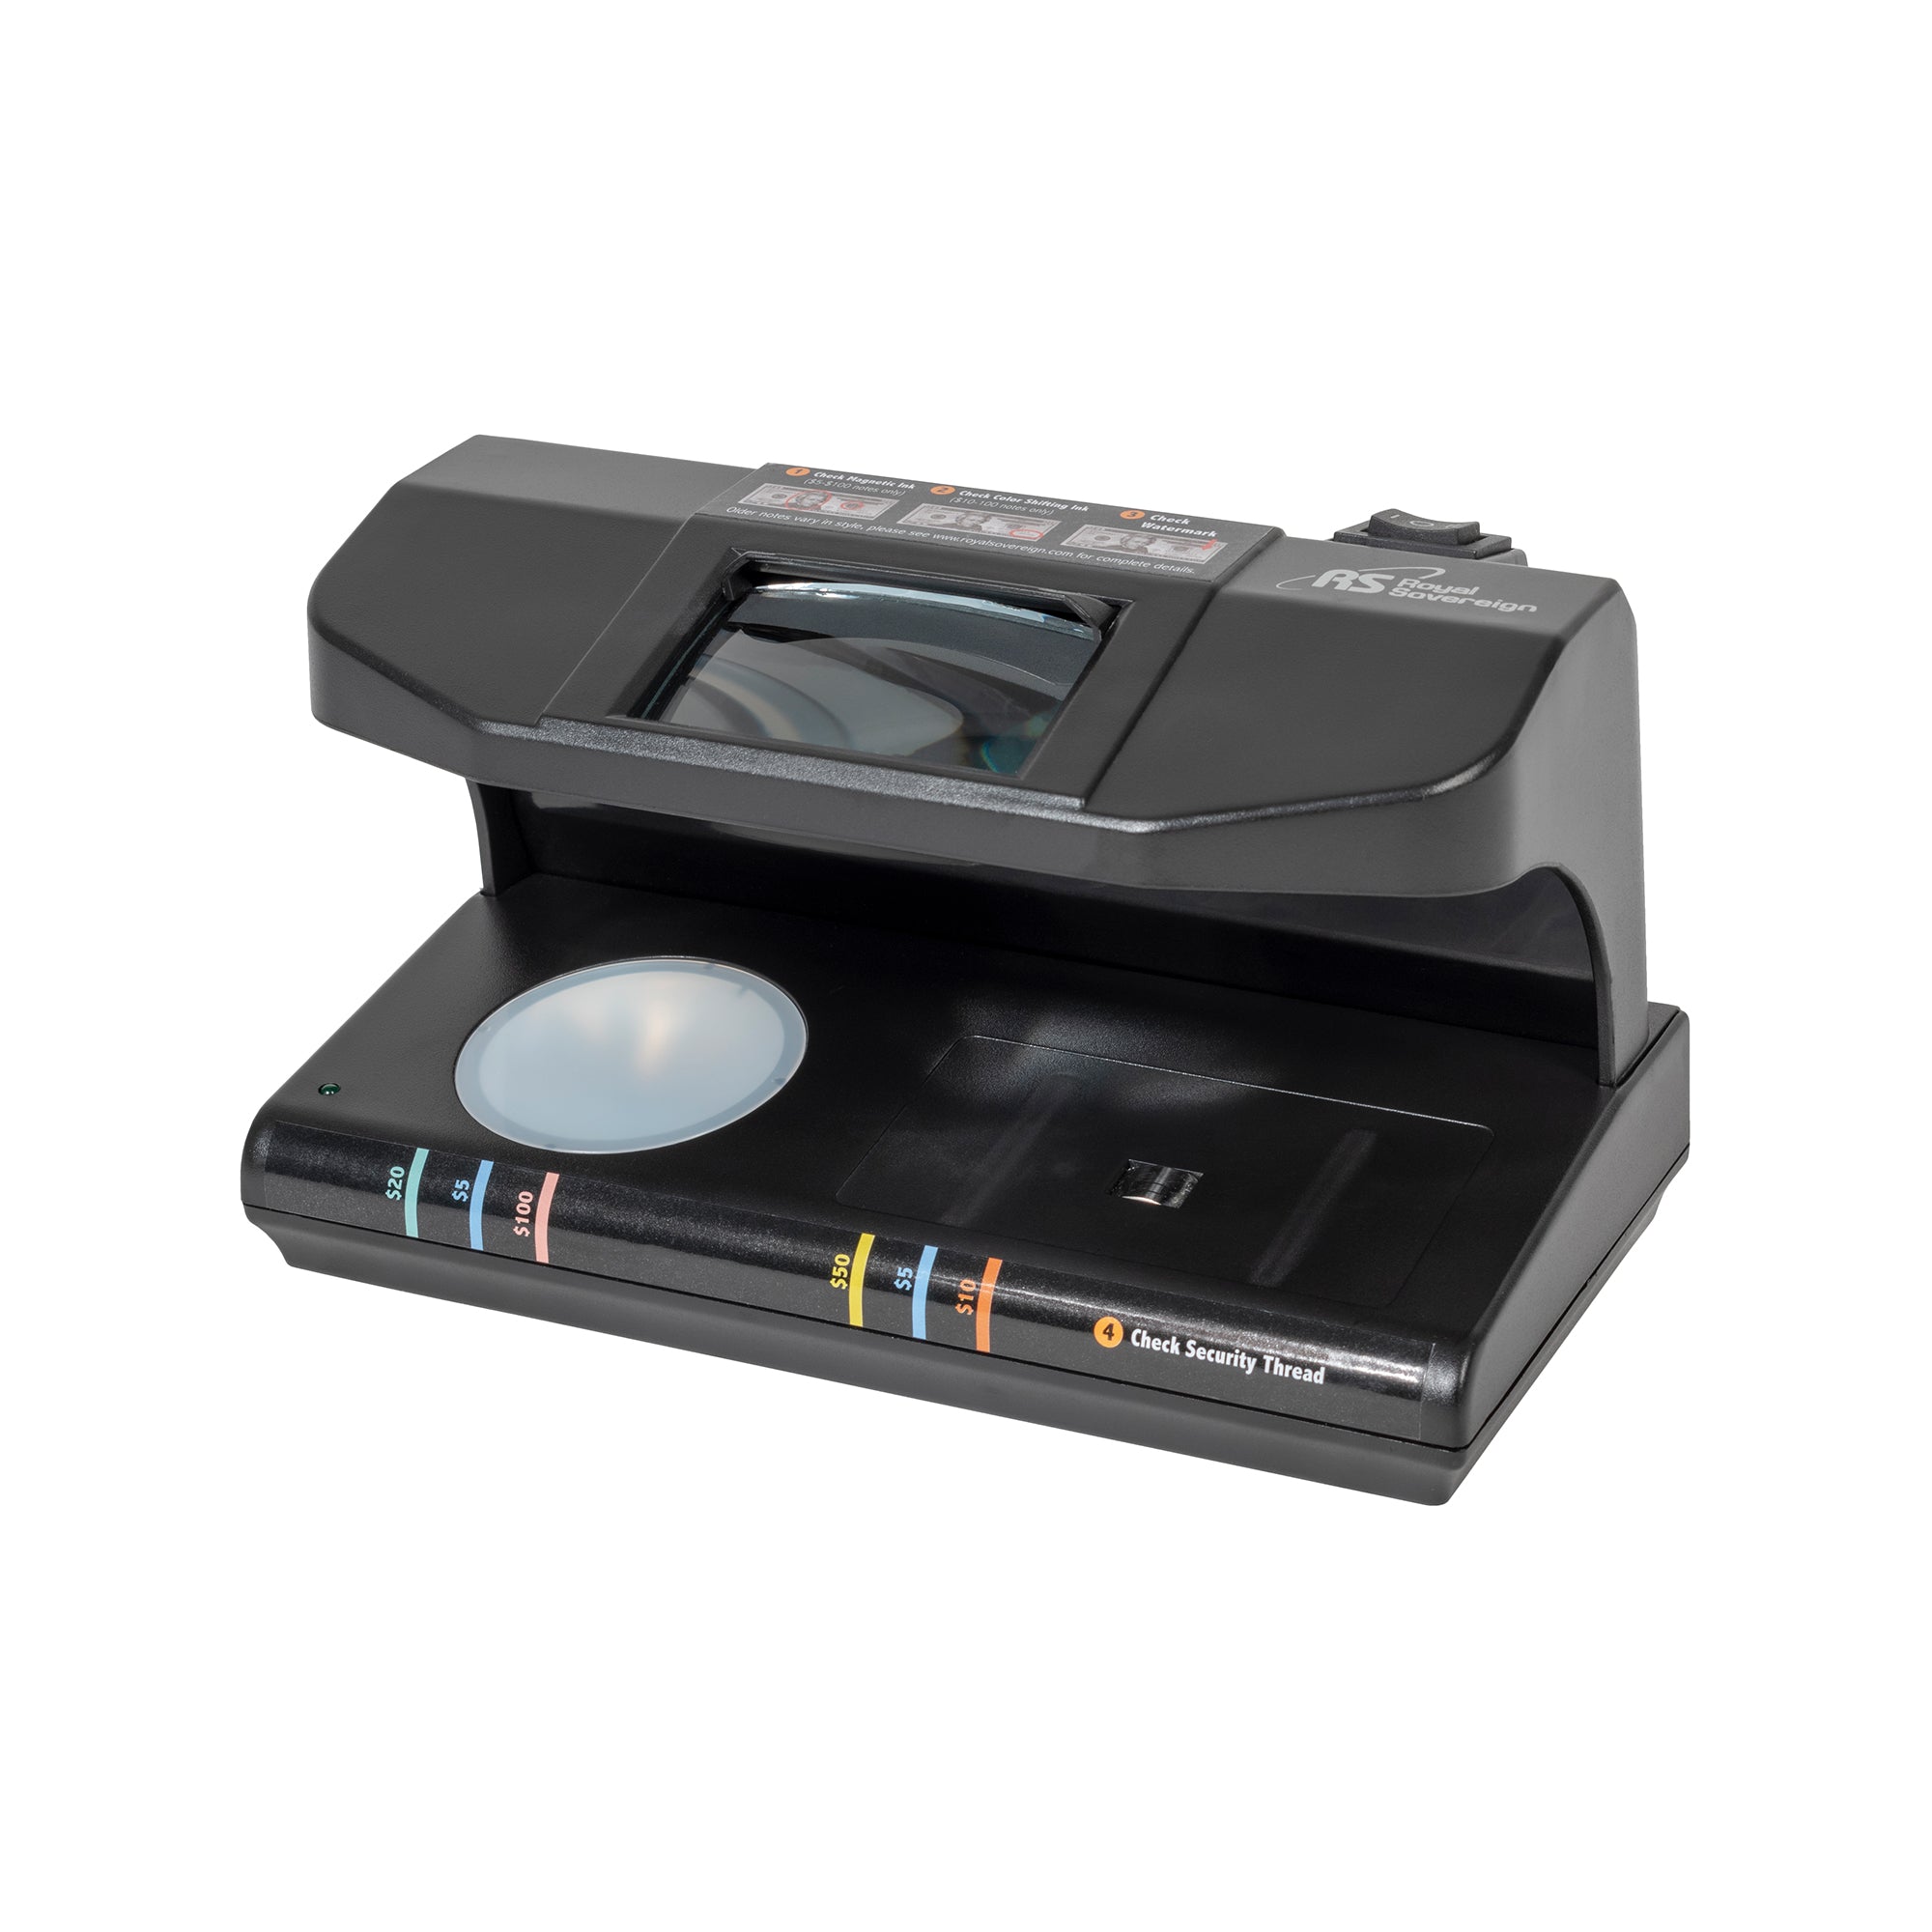 RCD-3000, 4 Way Counterfeit Detector, with Magnifying Lens